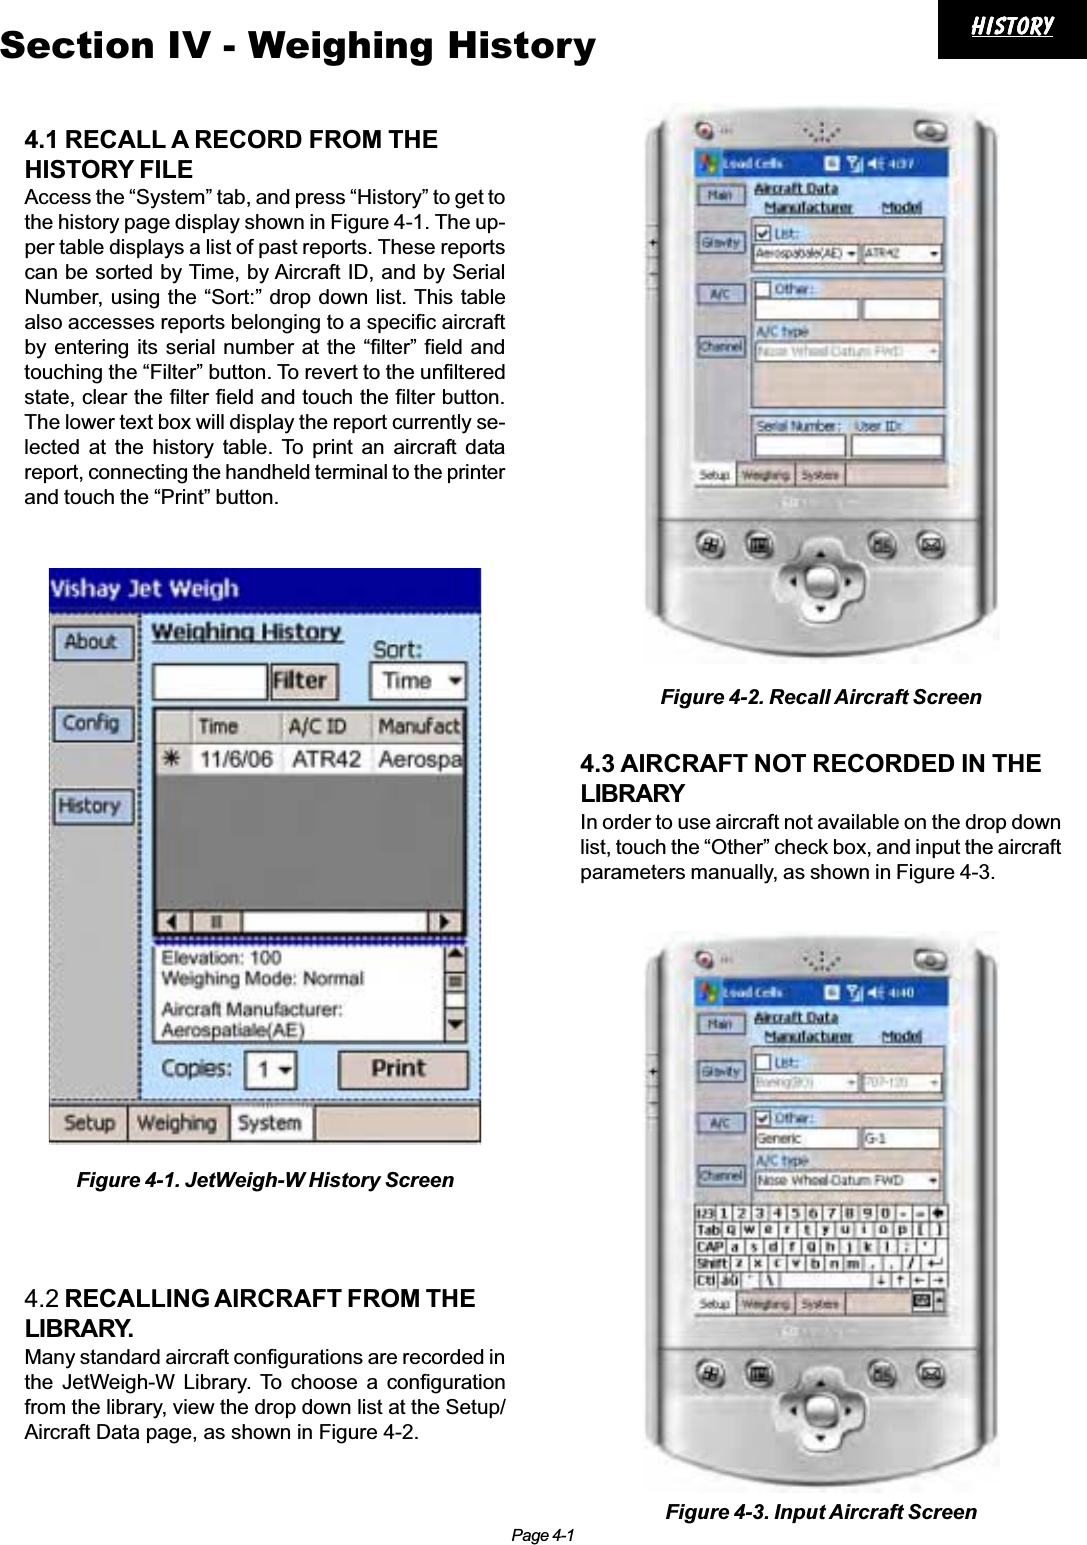 Page 4-1historyhistoryhistoryhistoryhistorySection IV - Weighing History4.1 RECALL A RECORD FROM THEHISTORY FILEAccess the “System” tab, and press “History” to get tothe history page display shown in Figure 4-1. The up-per table displays a list of past reports. These reportscan be sorted by Time, by Aircraft ID, and by SerialNumber, using the “Sort:” drop down list. This tablealso accesses reports belonging to a specific aircraftby entering its serial number at the “filter” field andtouching the “Filter” button. To revert to the unfilteredstate, clear the filter field and touch the filter button.The lower text box will display the report currently se-lected at the history table. To print an aircraft datareport, connecting the handheld terminal to the printerand touch the “Print” button.4.2 RECALLING AIRCRAFT FROM THELIBRARY.Many standard aircraft configurations are recorded inthe JetWeigh-W Library. To choose a configurationfrom the library, view the drop down list at the Setup/Aircraft Data page, as shown in Figure 4-2.4.3 AIRCRAFT NOT RECORDED IN THELIBRARYIn order to use aircraft not available on the drop downlist, touch the “Other” check box, and input the aircraftparameters manually, as shown in Figure 4-3.Figure 4-1. JetWeigh-W History ScreenFigure 4-2. Recall Aircraft ScreenFigure 4-3. Input Aircraft Screen